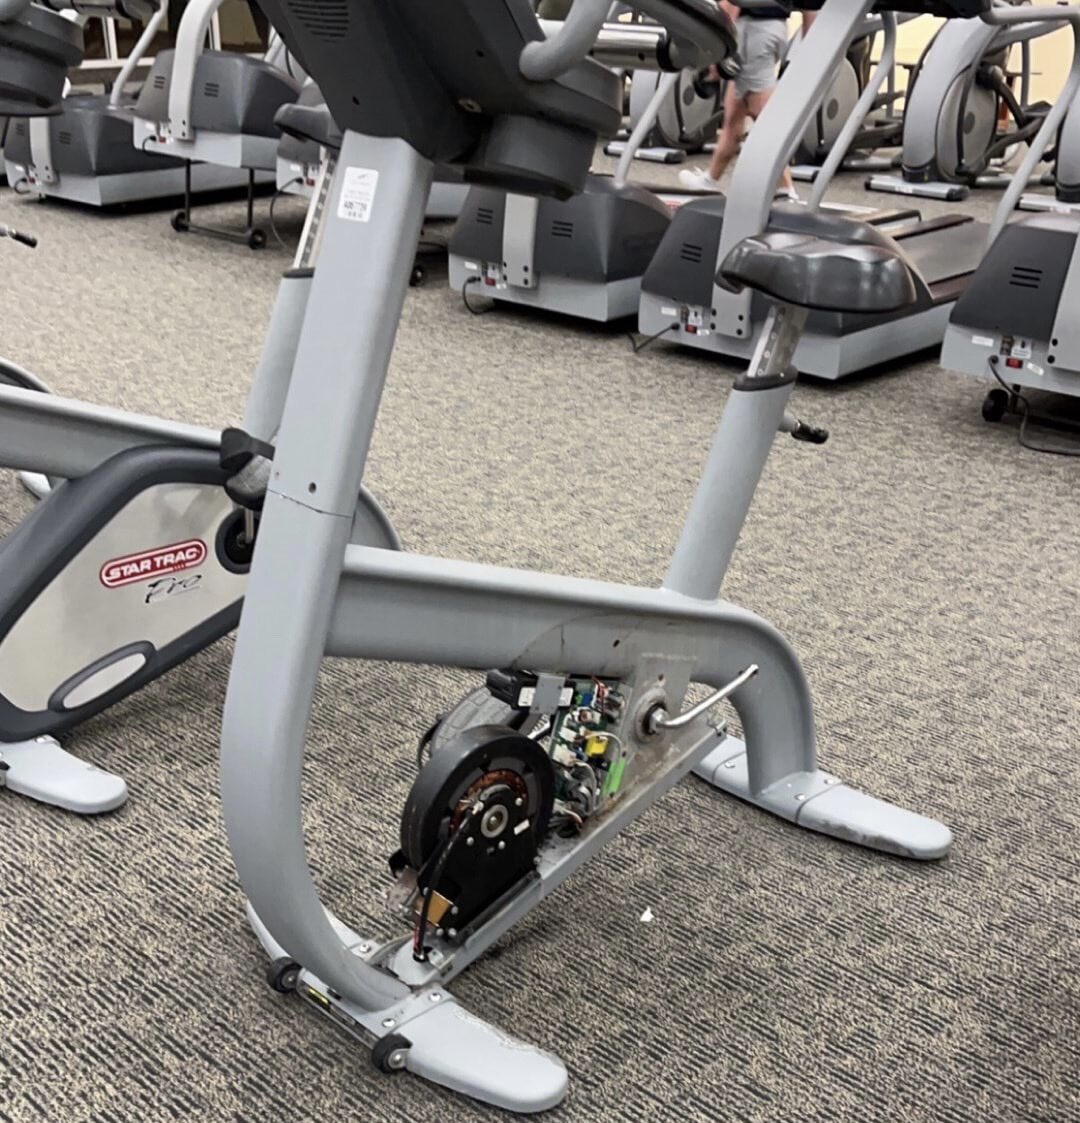 Don’t go on the bikes at LA Fitness. They are using you to mine bitcoin for them.